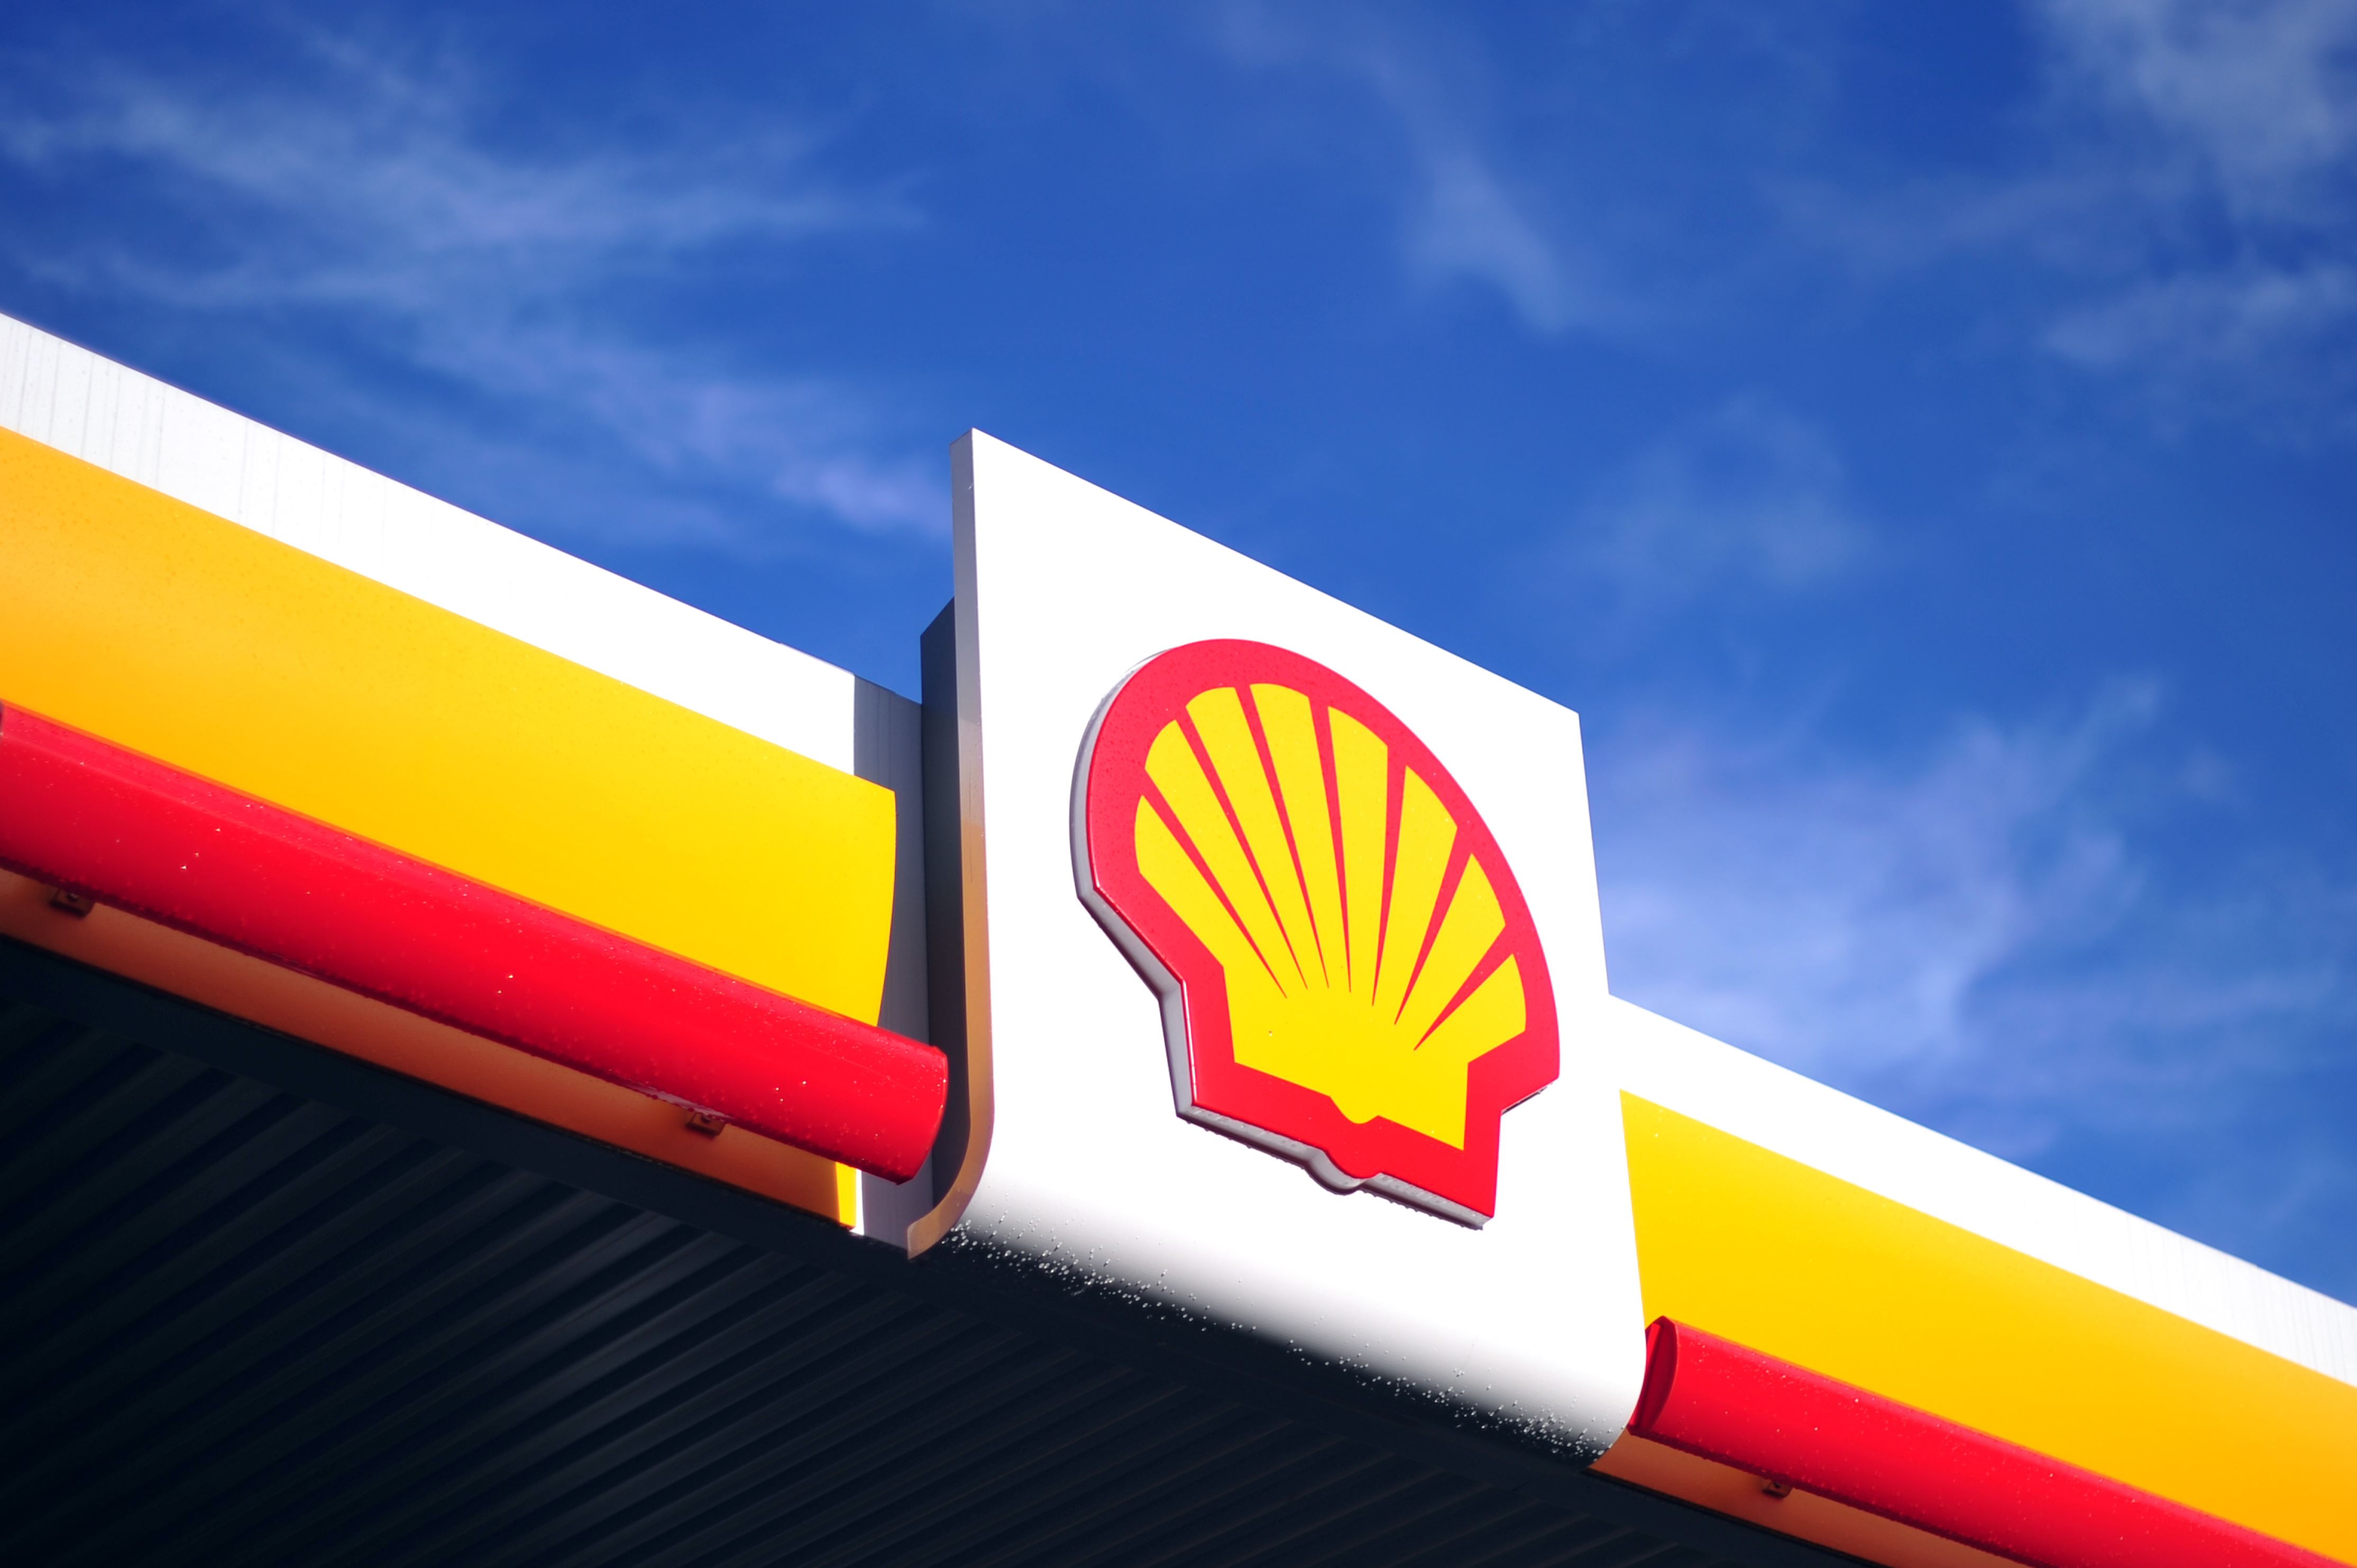 Shell Backgrounds, Compatible - PC, Mobile, Gadgets| 4457x2965 px